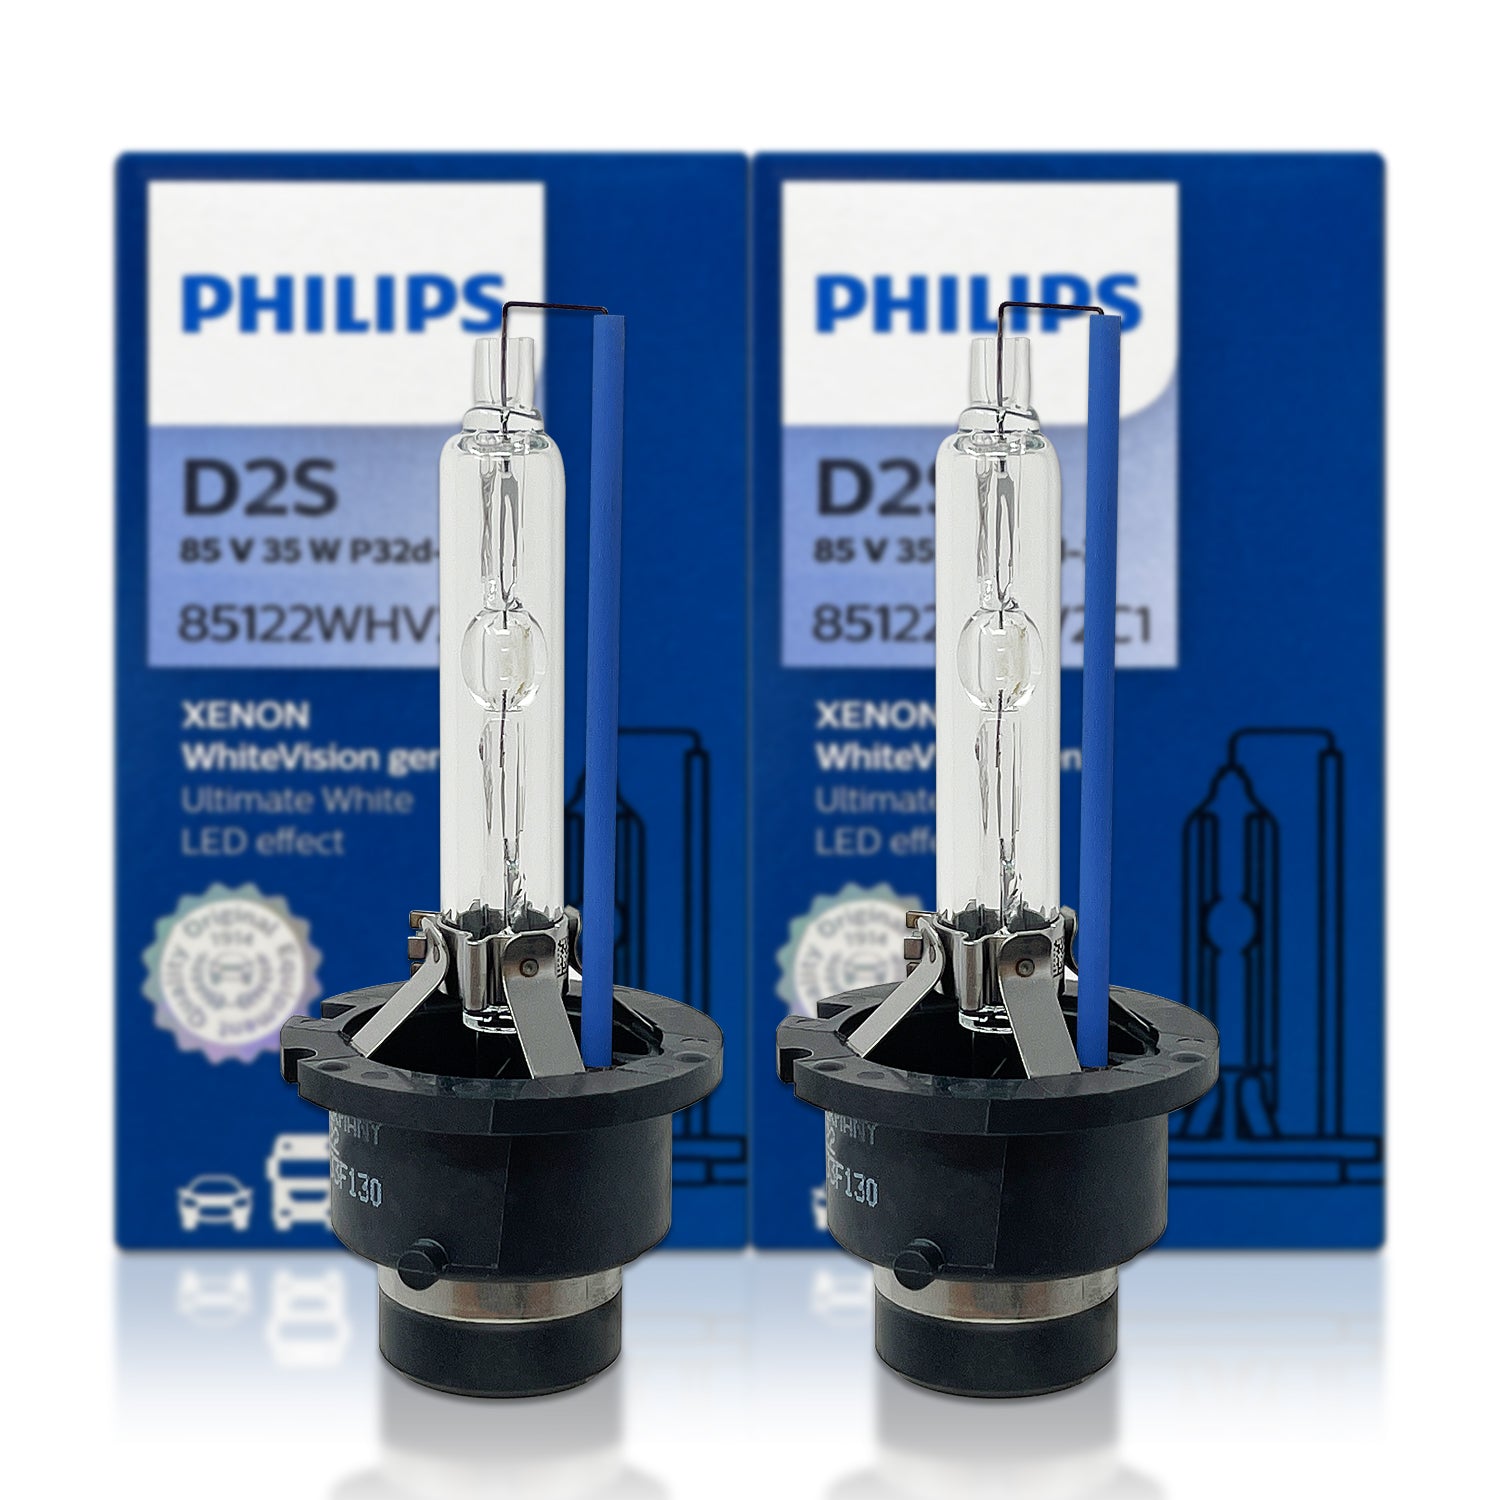 Philips D2S 85122WHV2S1 WhiteVision gen2 Xenon Brenner in S1 Verpackung